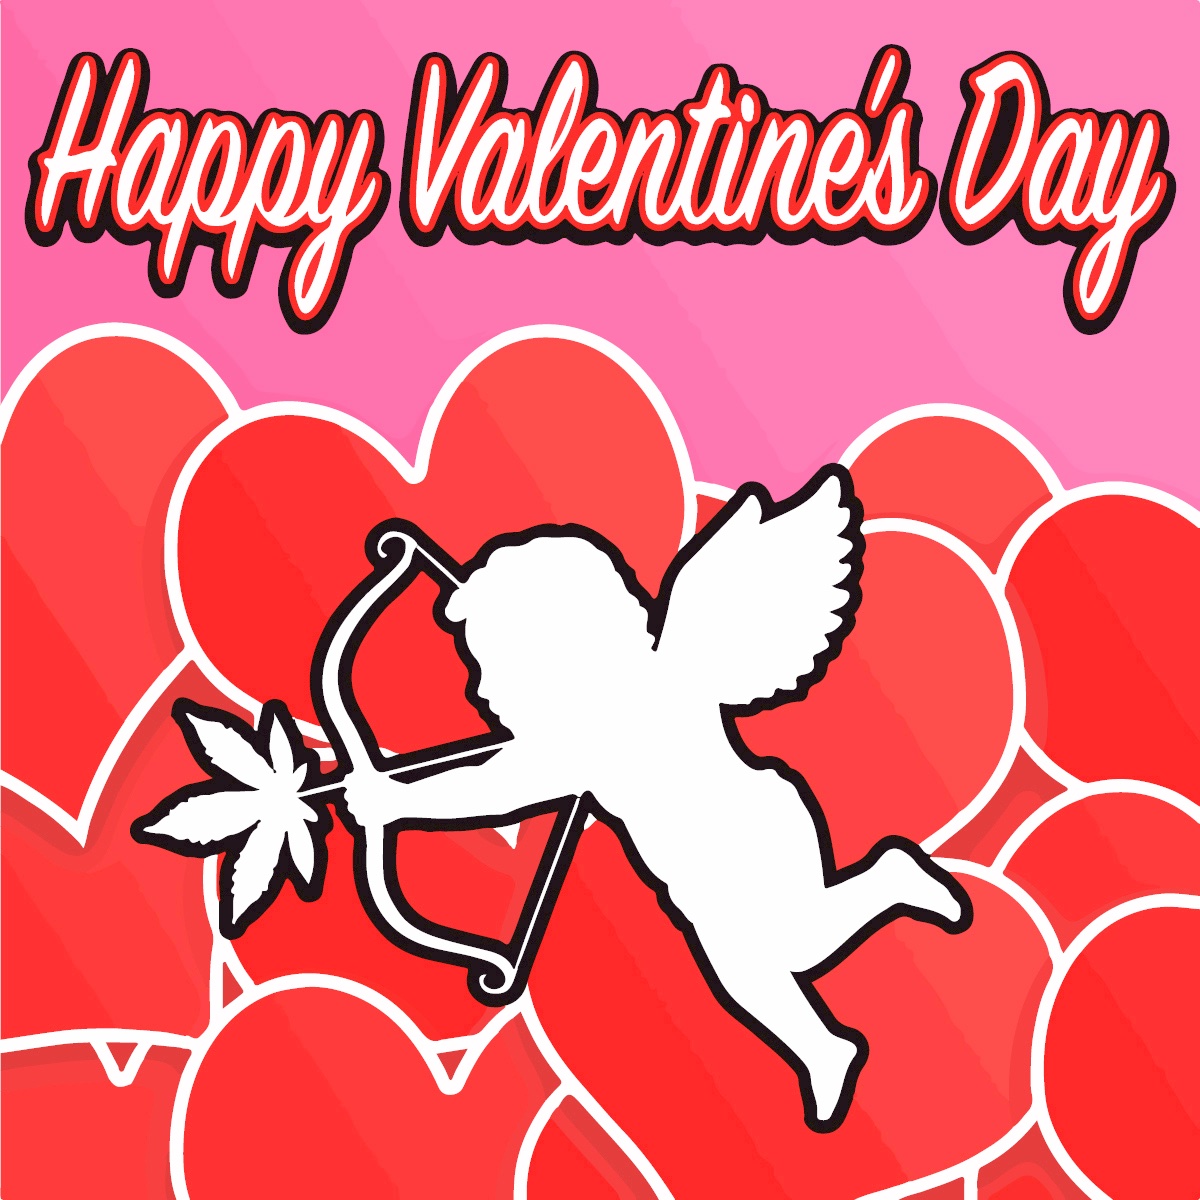 Happy #Valentines Day! #love #420EasyStreet #fourtwenty #glasspipes #freezepipes #bongs 420easystreet.com